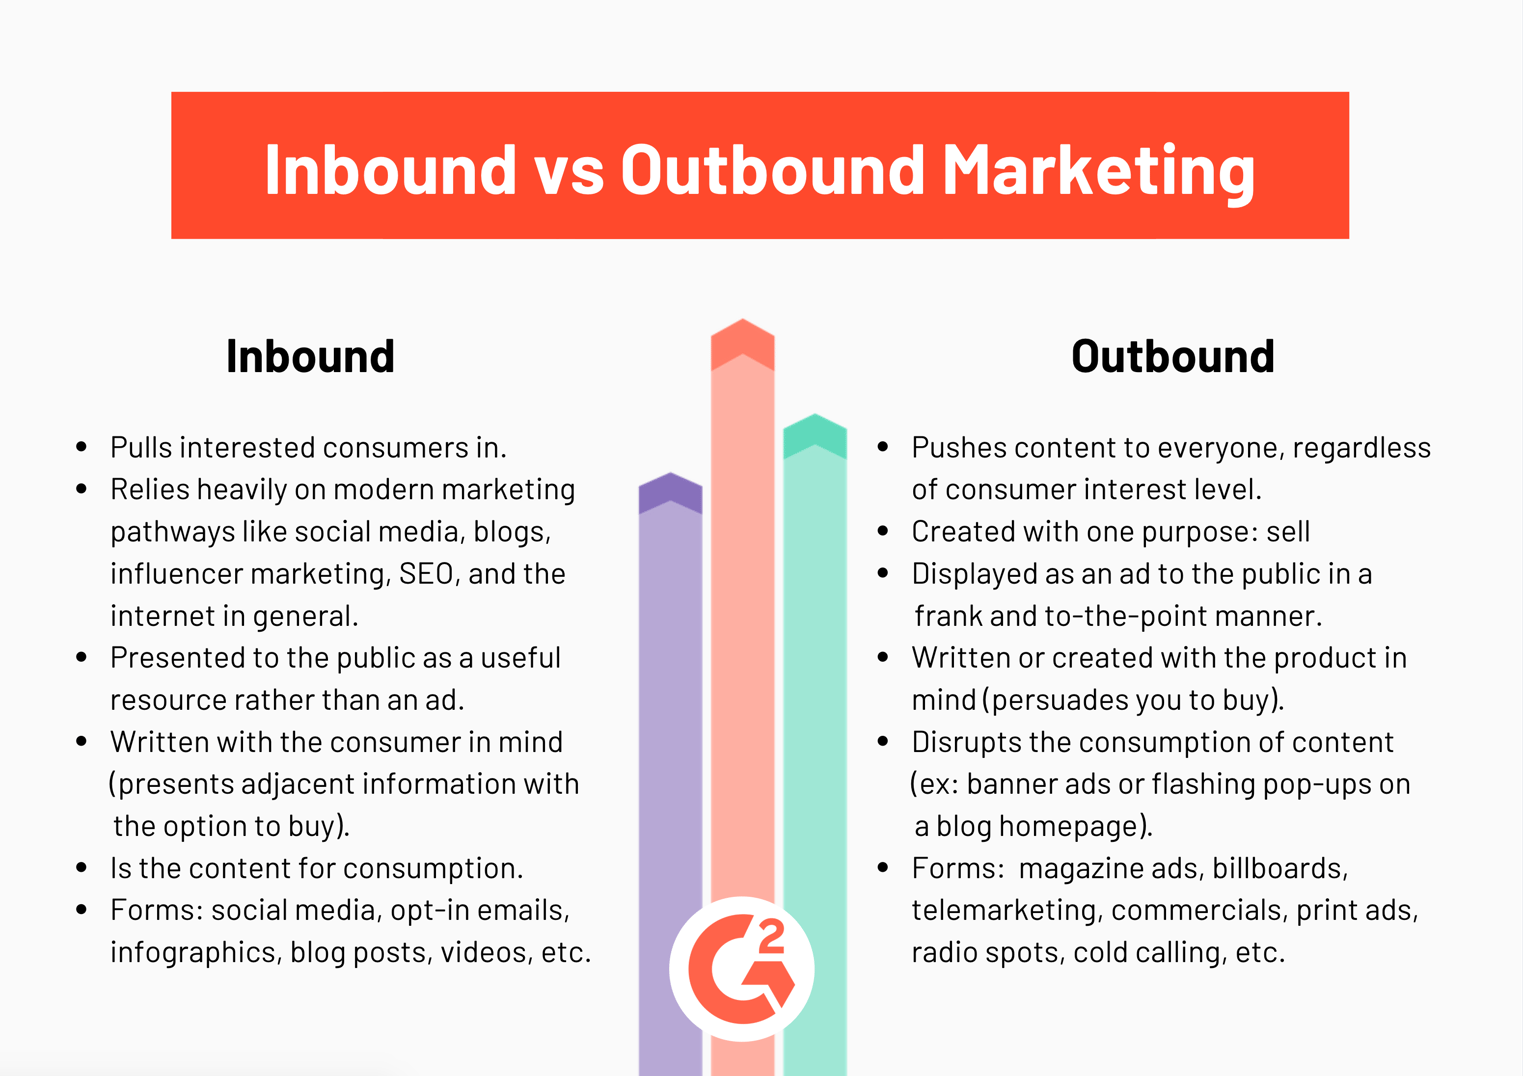 difference between inbound and outbound tourism in points